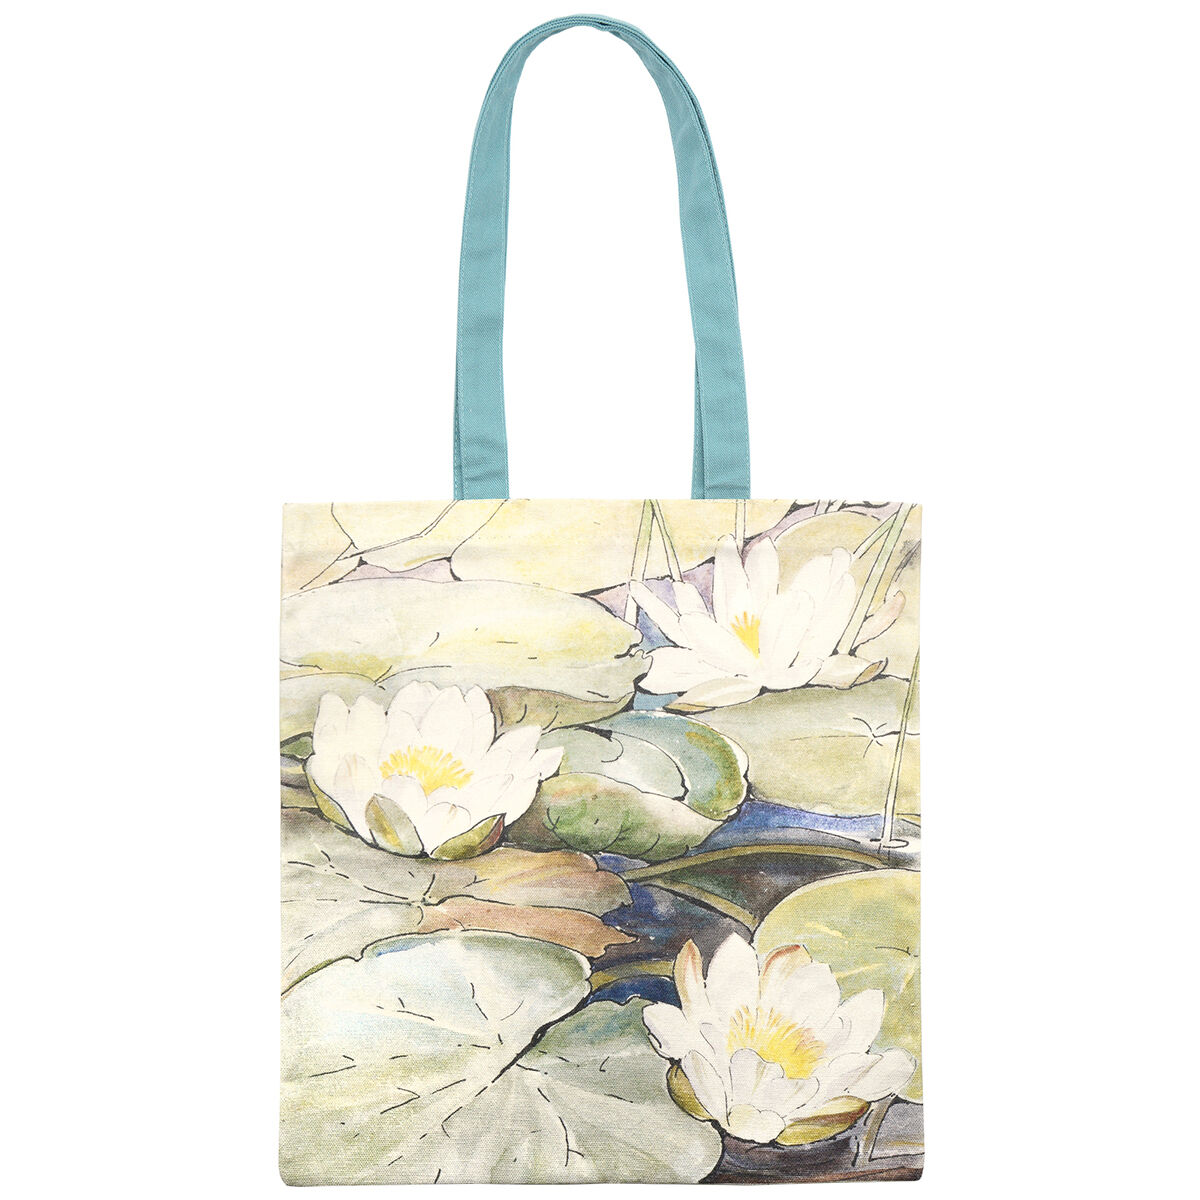 Pink Water Lily Flowers Tote Bag by Paldas Photography - Photos.com